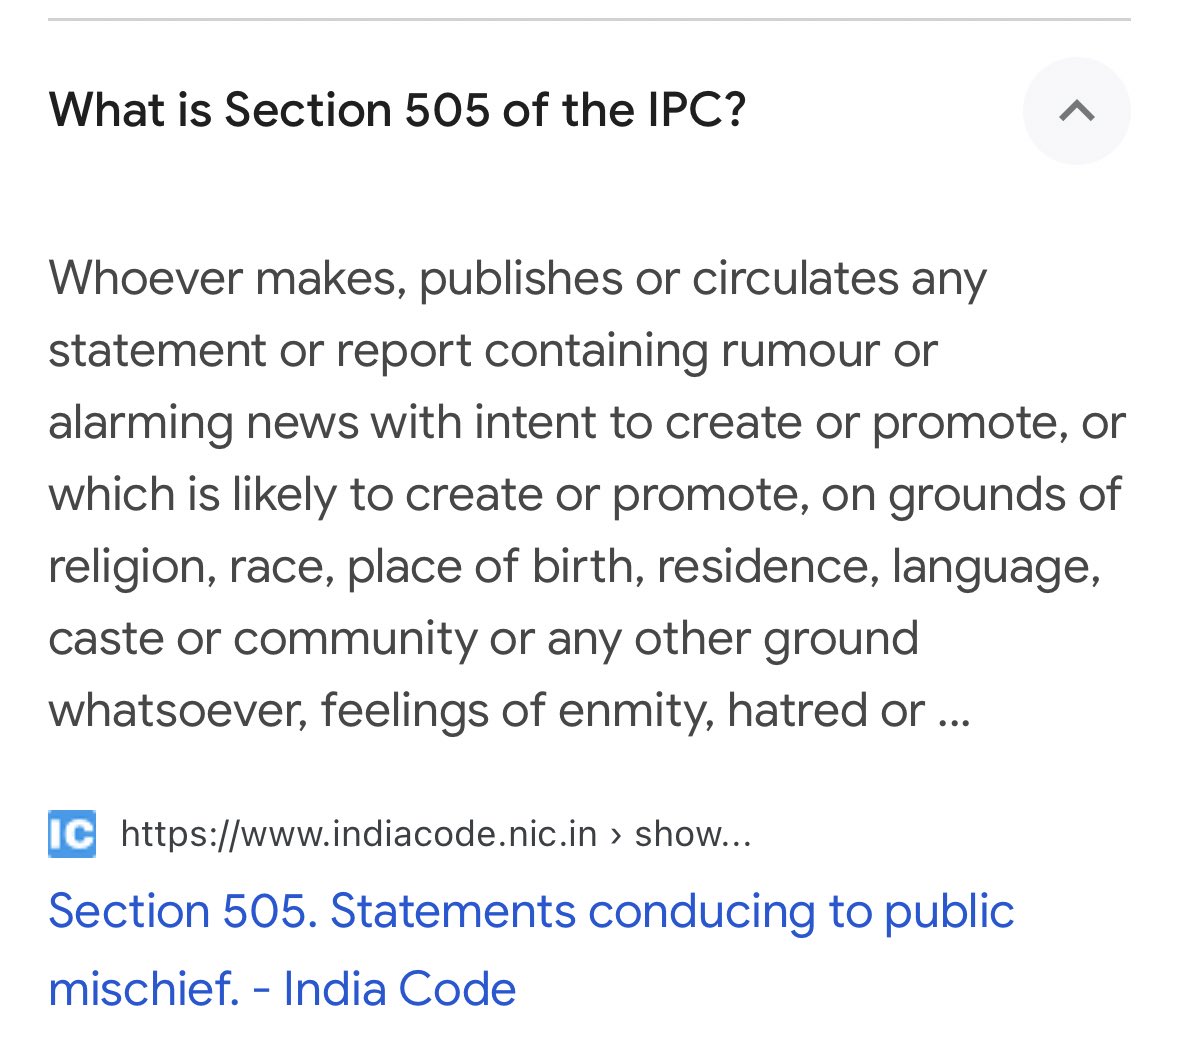 Does the Indian legal system & authorities have the guts to arrest Poonam Pandey under IPC 505 & other relevant IPCs?

#WomenAreBurden